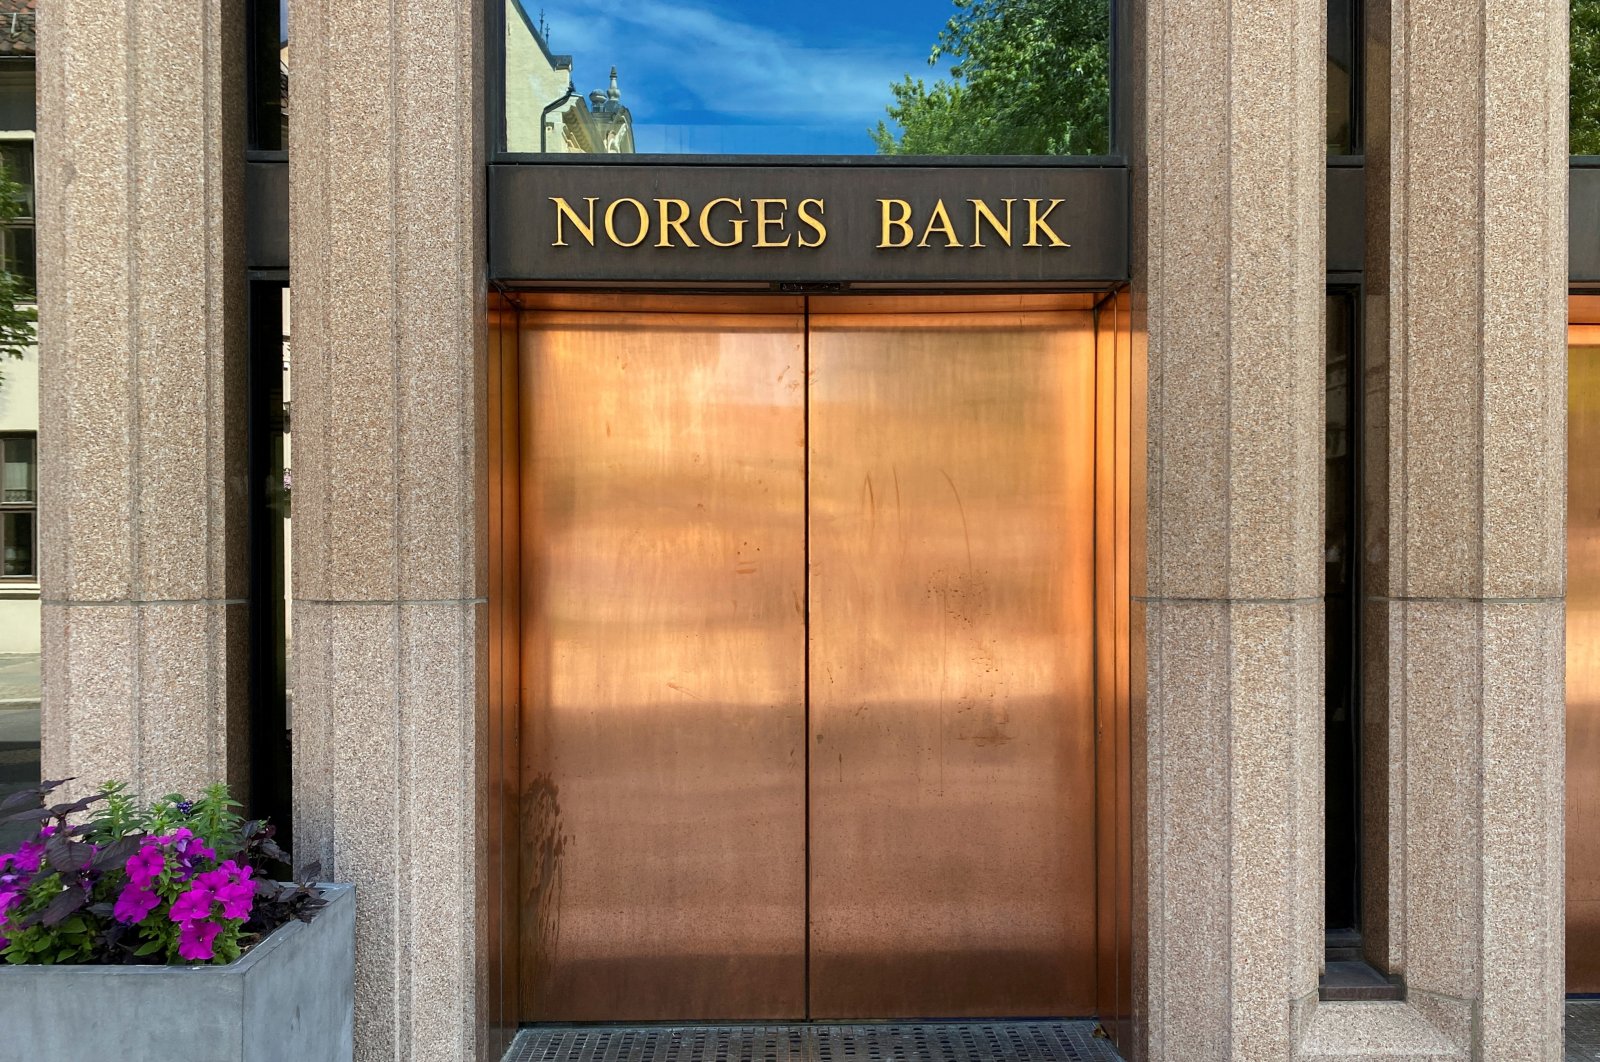 A view shows the building of Norway’s central bank, Norges Bank, in Oslo, Norway, June 23, 2022. (Reuters Photo)